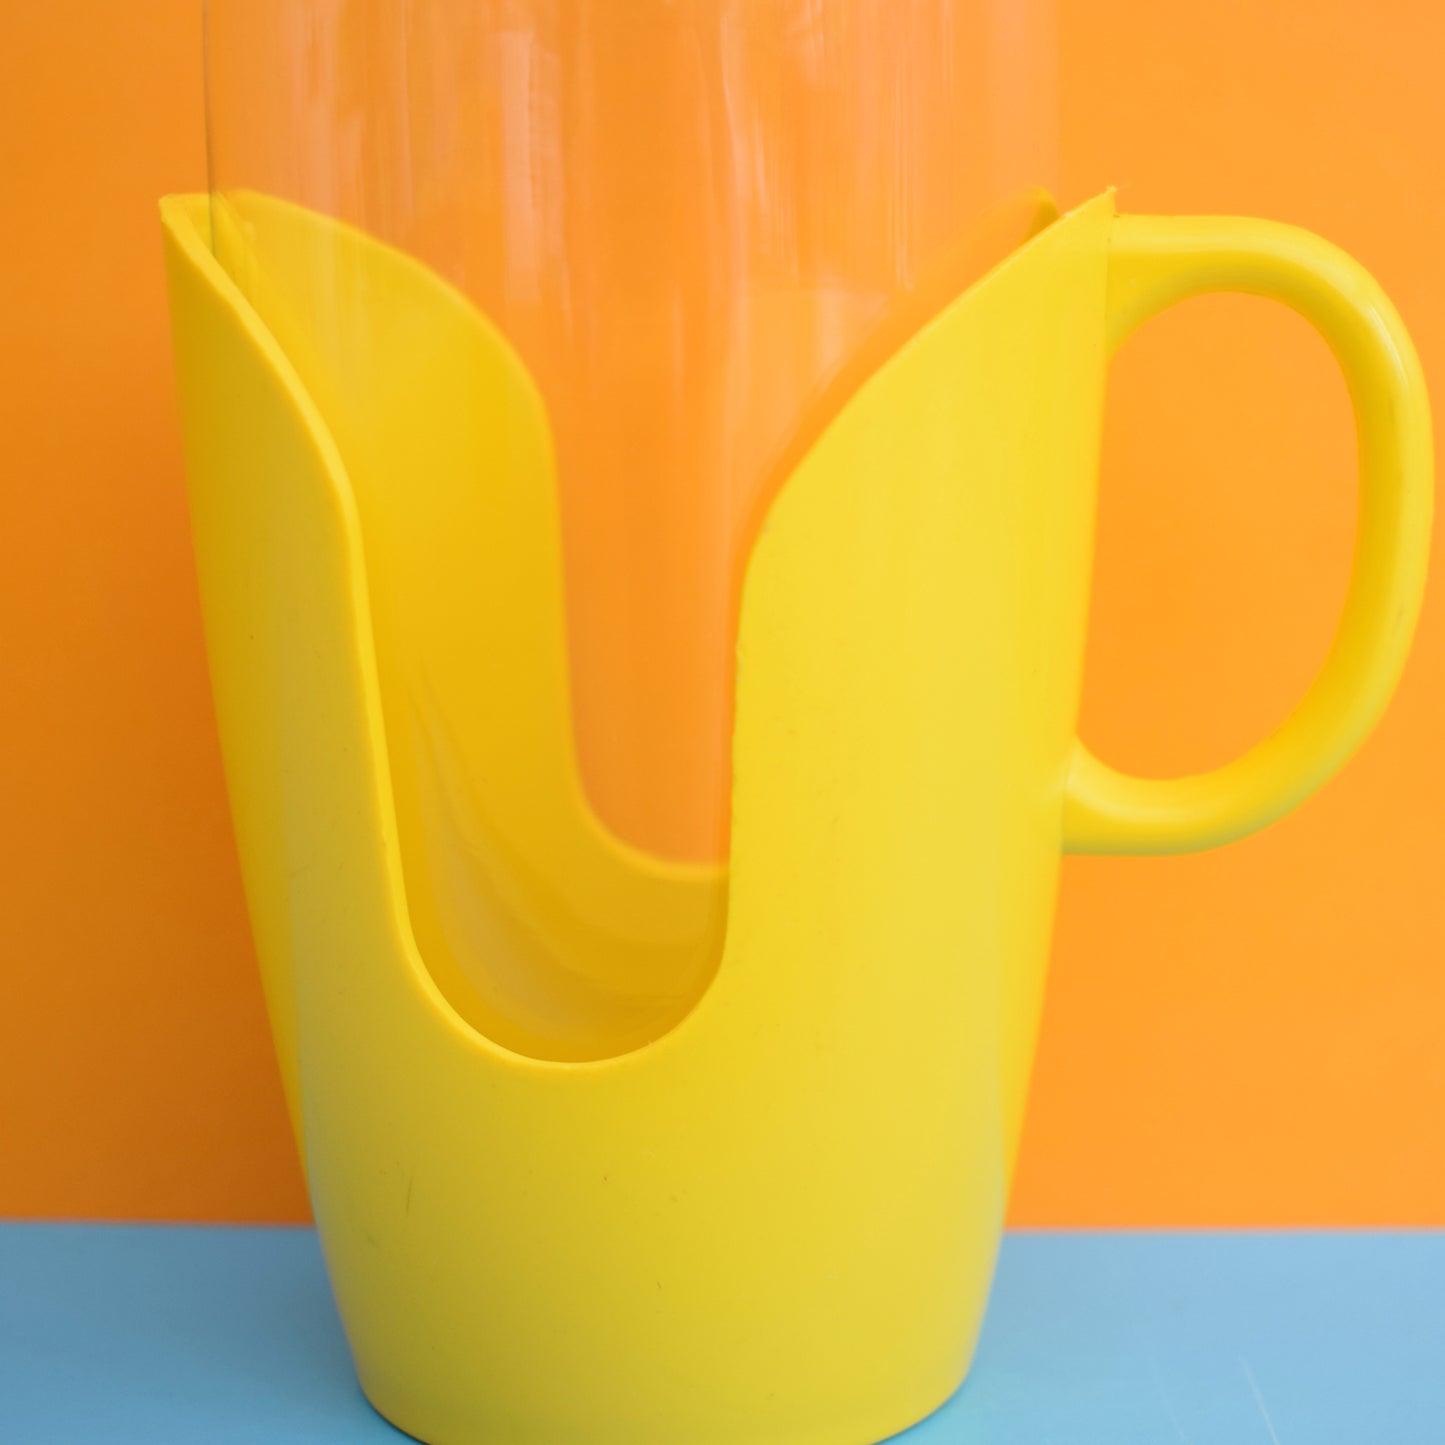 Vintage 1960s Drink-Up Glass Mugs x2 - Yellow